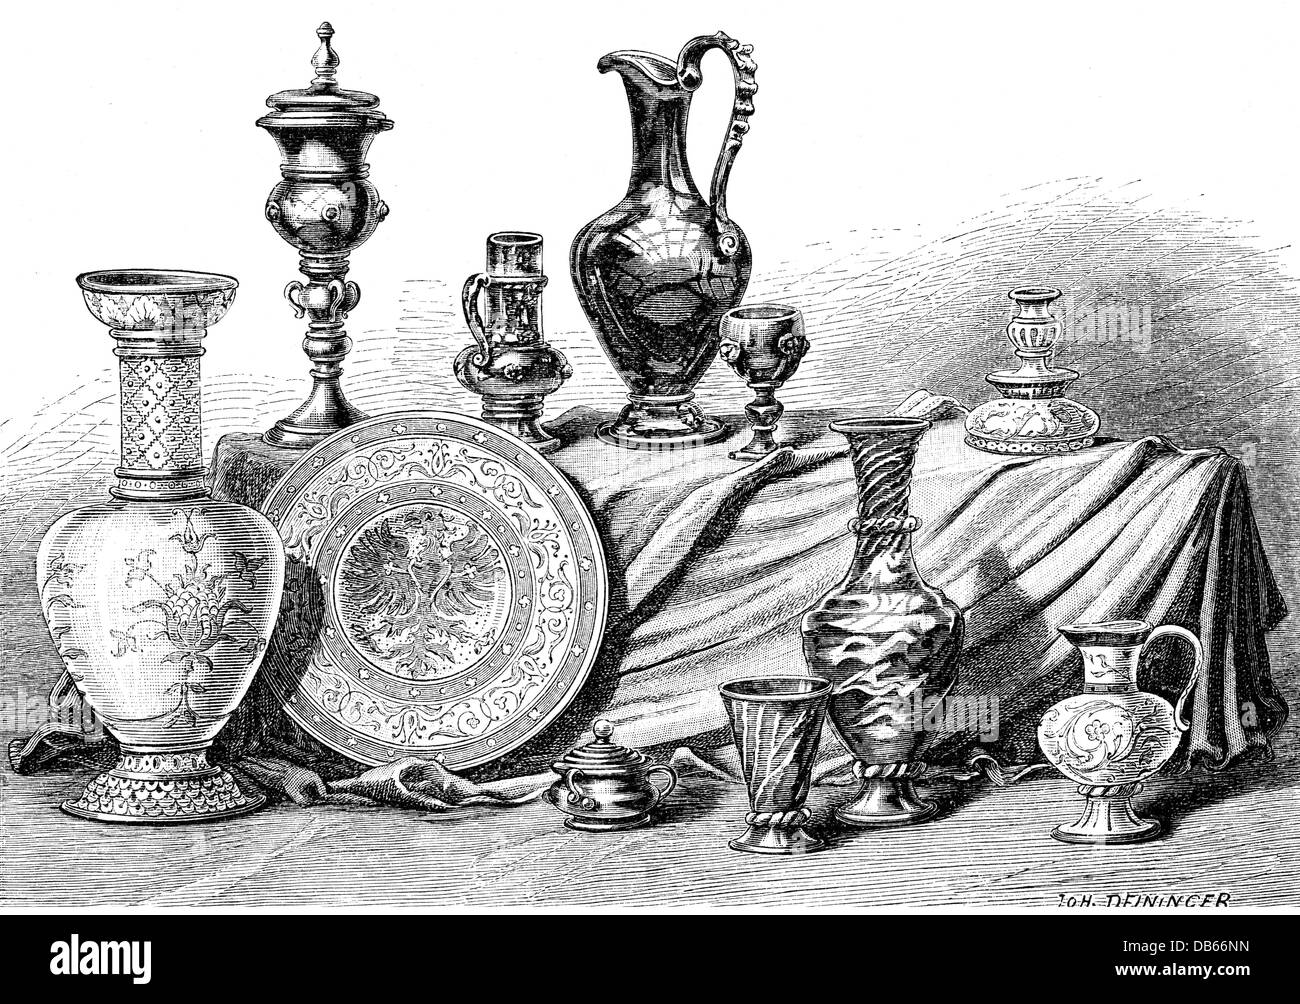 fine arts, craft / handcraft, green glasses from Kramsach and Maiolica from Schwaz, wood engraving by Johann Deininger, 19th century, green-coloured, ornamented, painted, vessel, vessels, decanter, decanters, vase, vases, plate, plates, draped, kitchenware, pots and pans, tableware, goblet, goblets, can, cans, small jug, pot, a pot of coffee, pot, tableware, tableware, historic, historical, carafe, chalice, chalices, mug, cup, mugs, cups, Maiolika, Majolica, glass, Additional-Rights-Clearences-Not Available Stock Photo